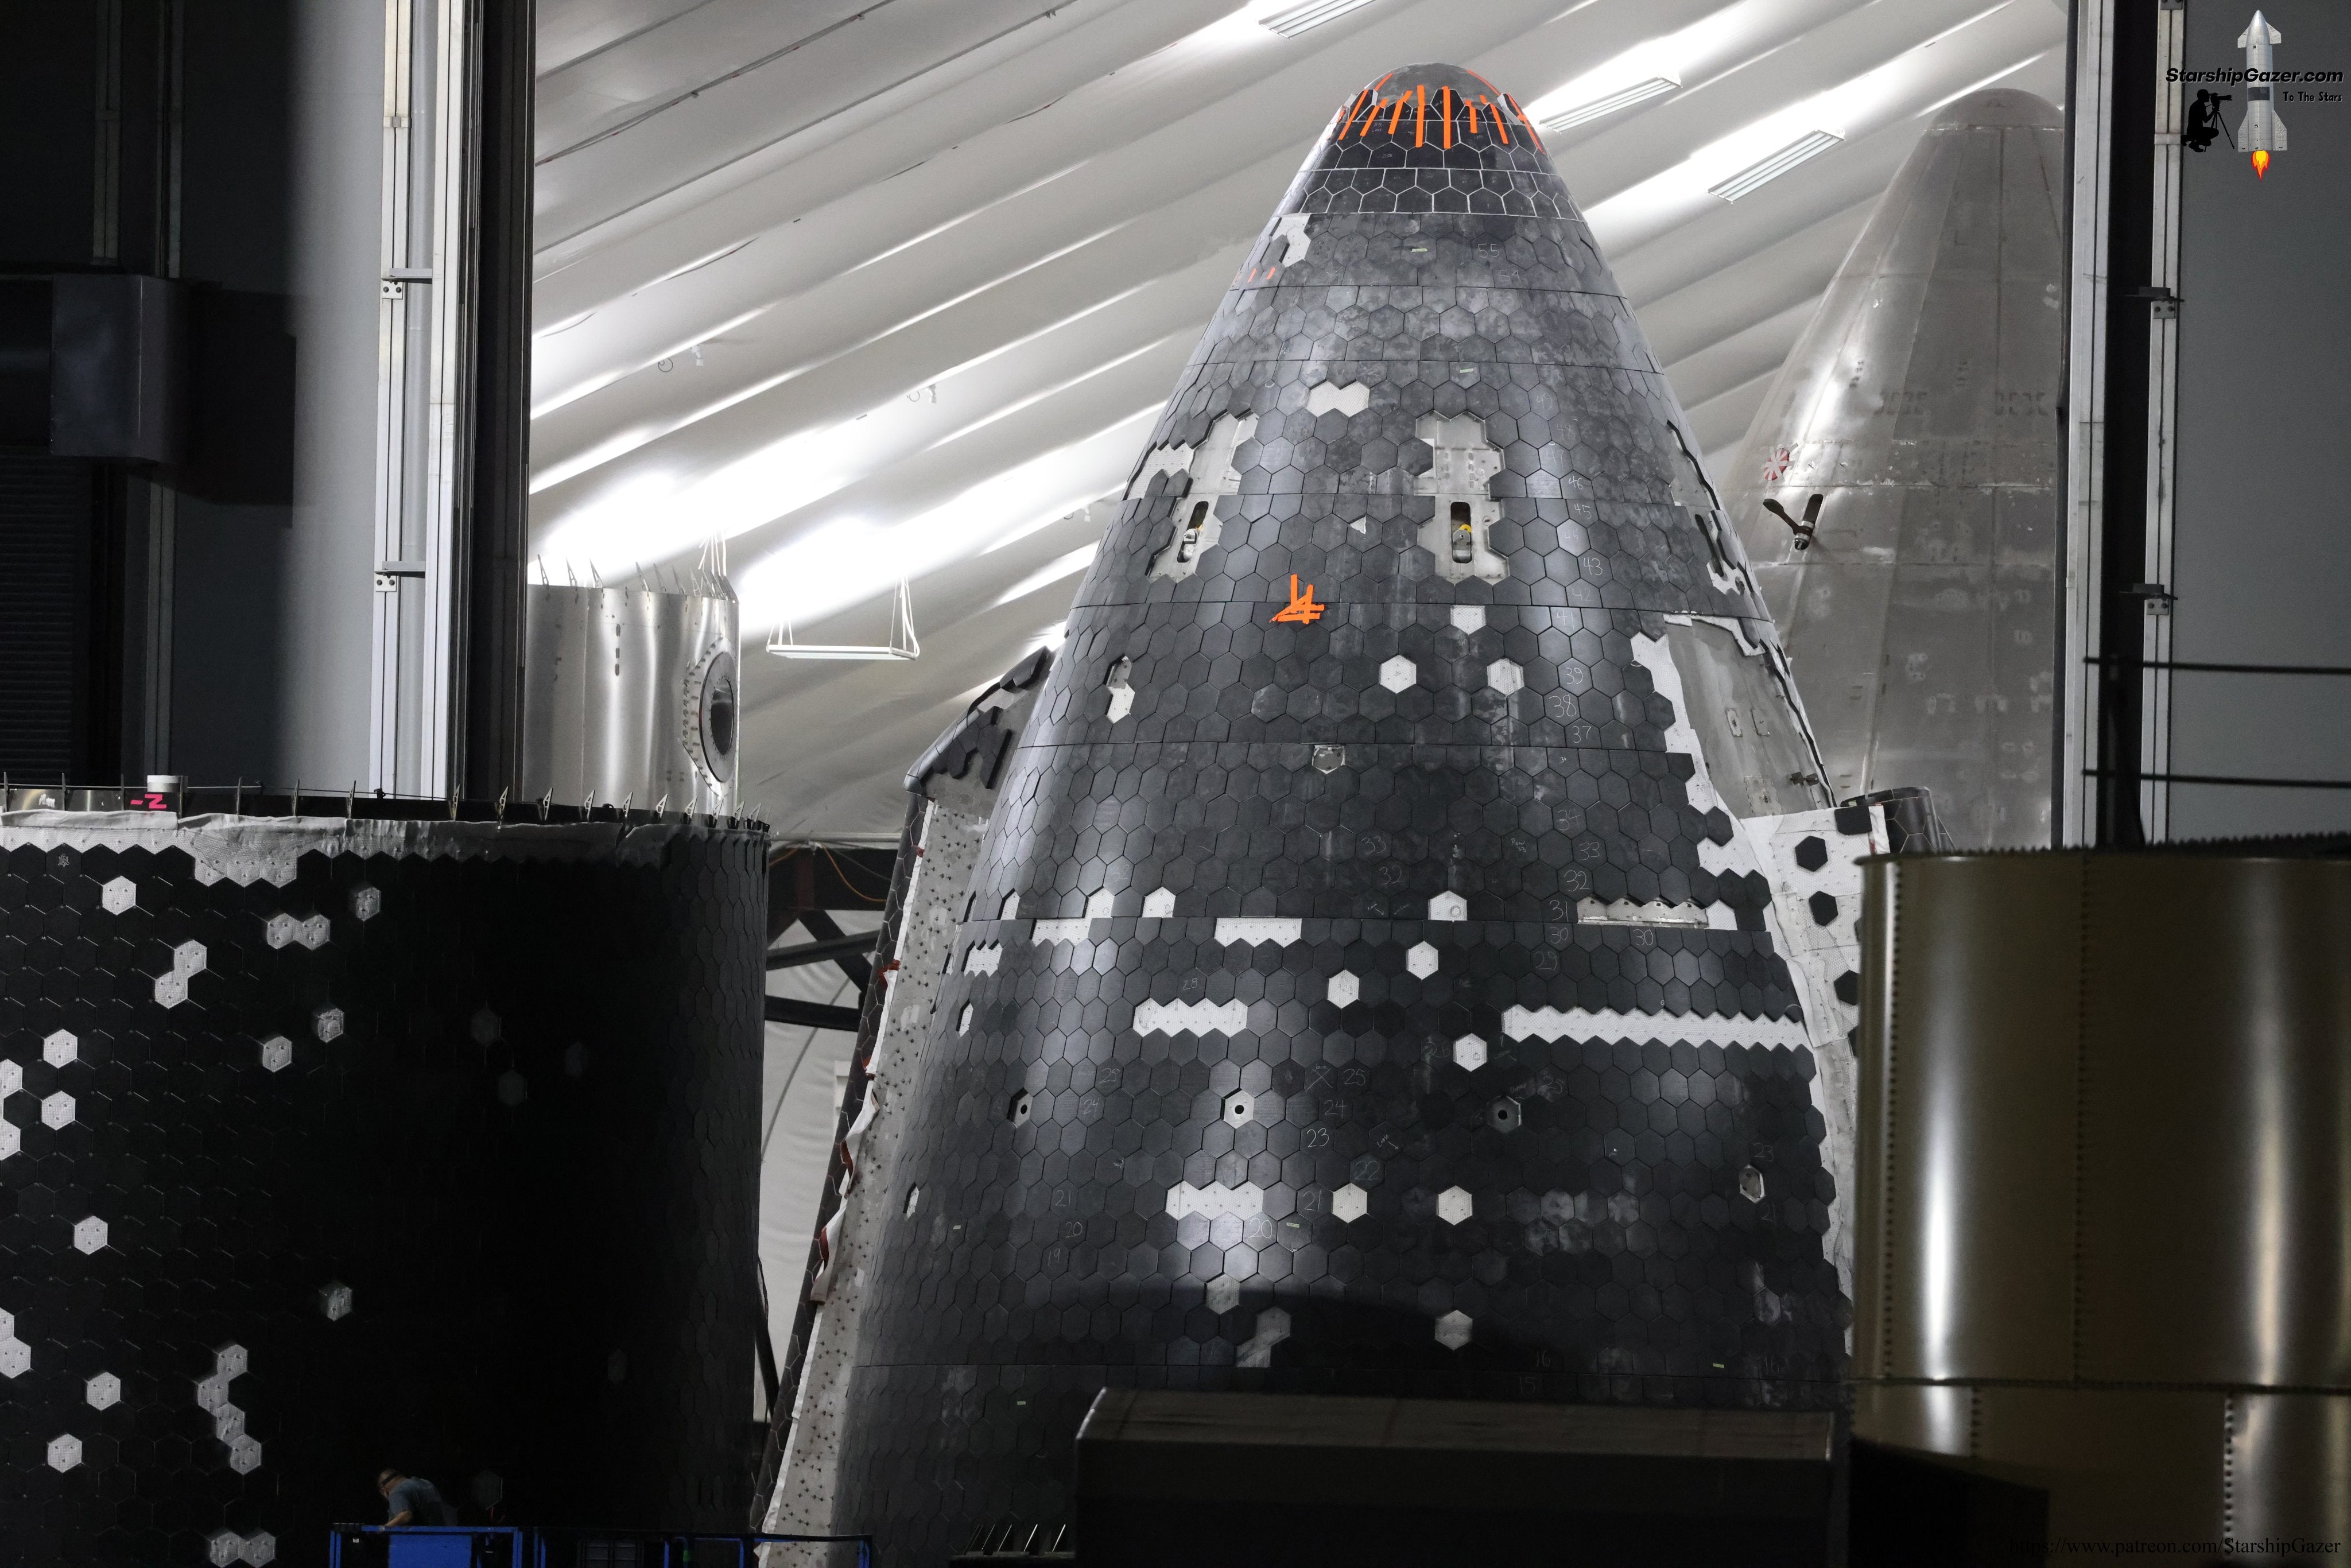 SpaceX Is Already Manufacturing The Next Orbital Launch Vehicle – Starship SN21